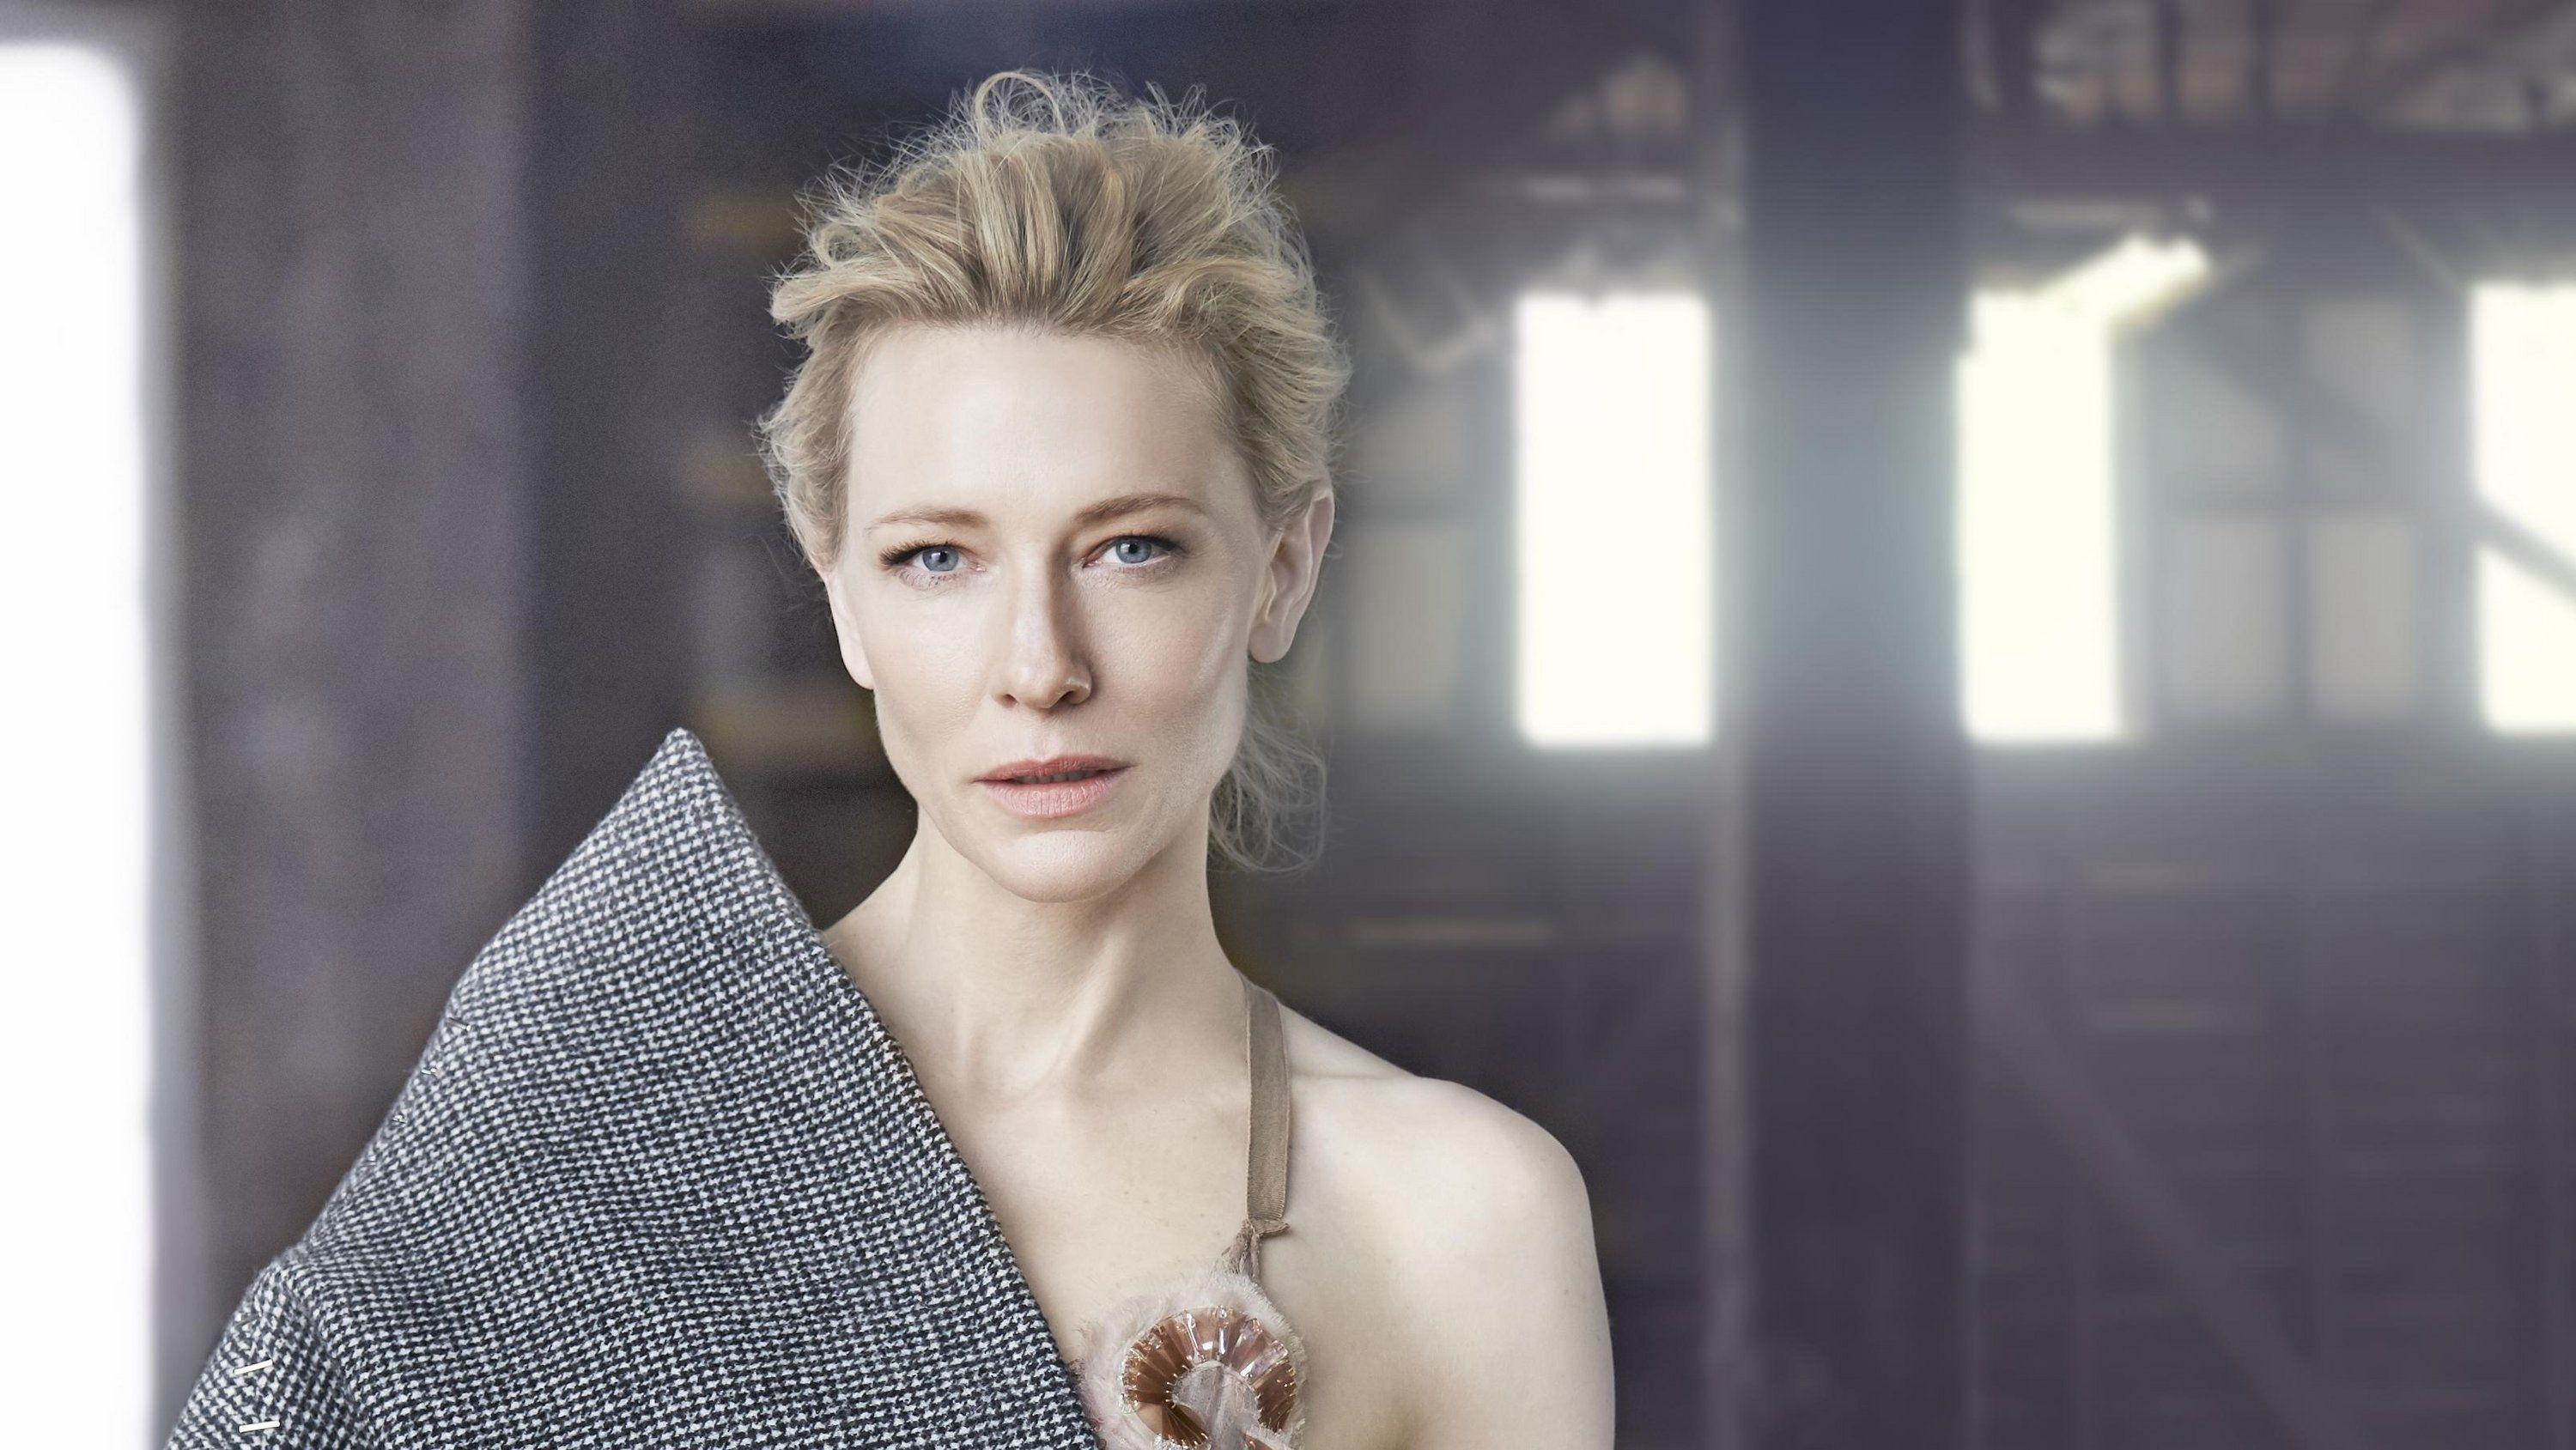 Cate Blanchett Wallpaper Image Photo Picture Background